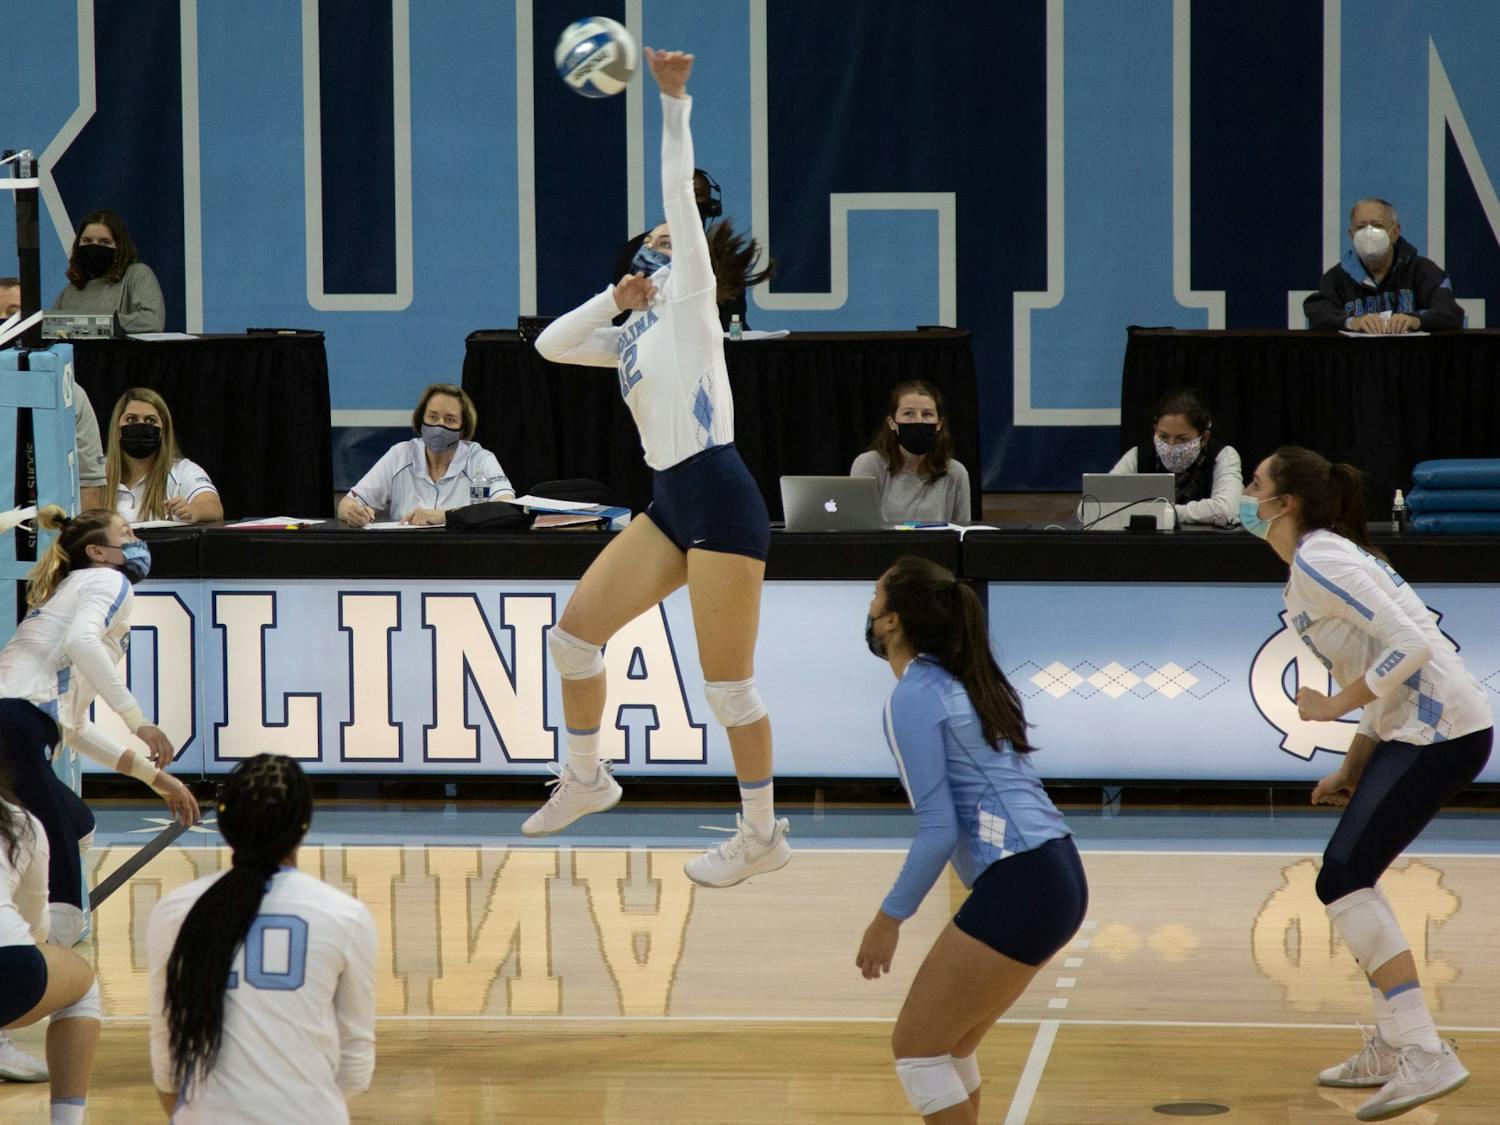 Junior setter Erin Boone (12) hits the ball in a volleyball game against Appalachian State University on Thursday, Feb. 18, 2021 in Carmichael Arena. The Tar Heels won 3-0.